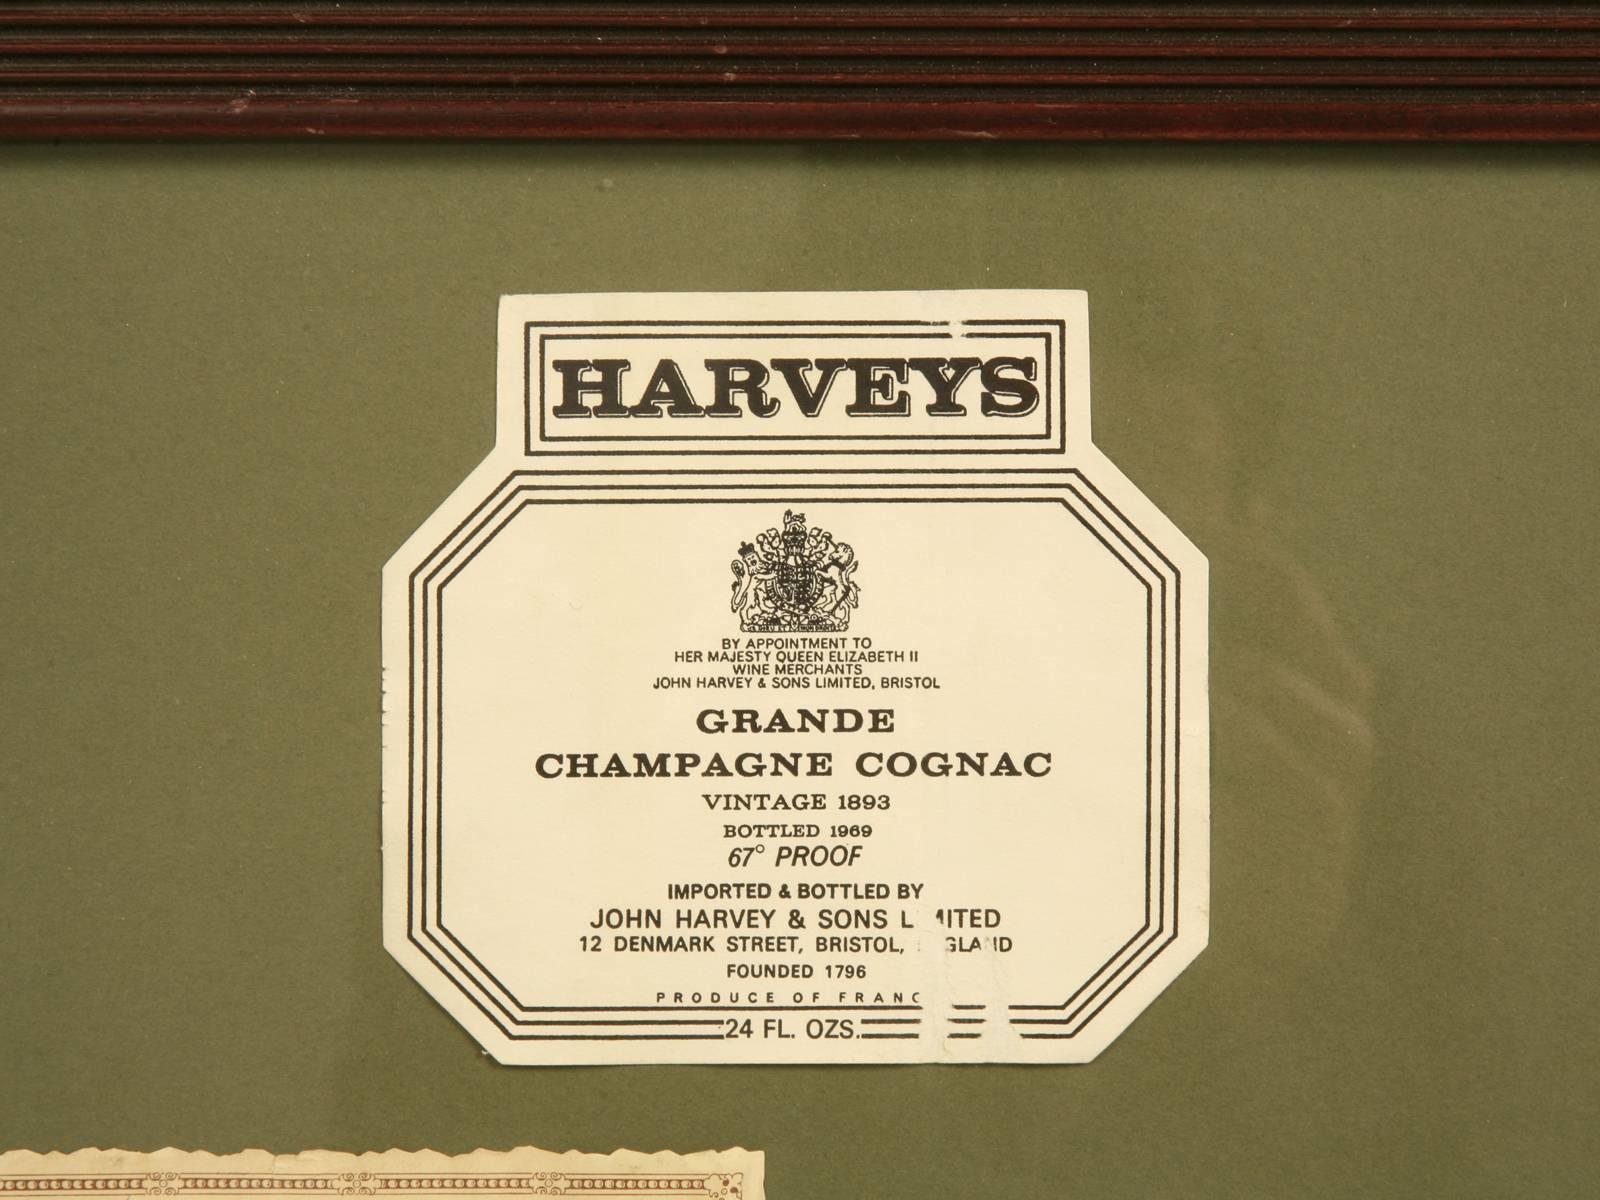 Framed collection of labels that would look great in a wine cellar.